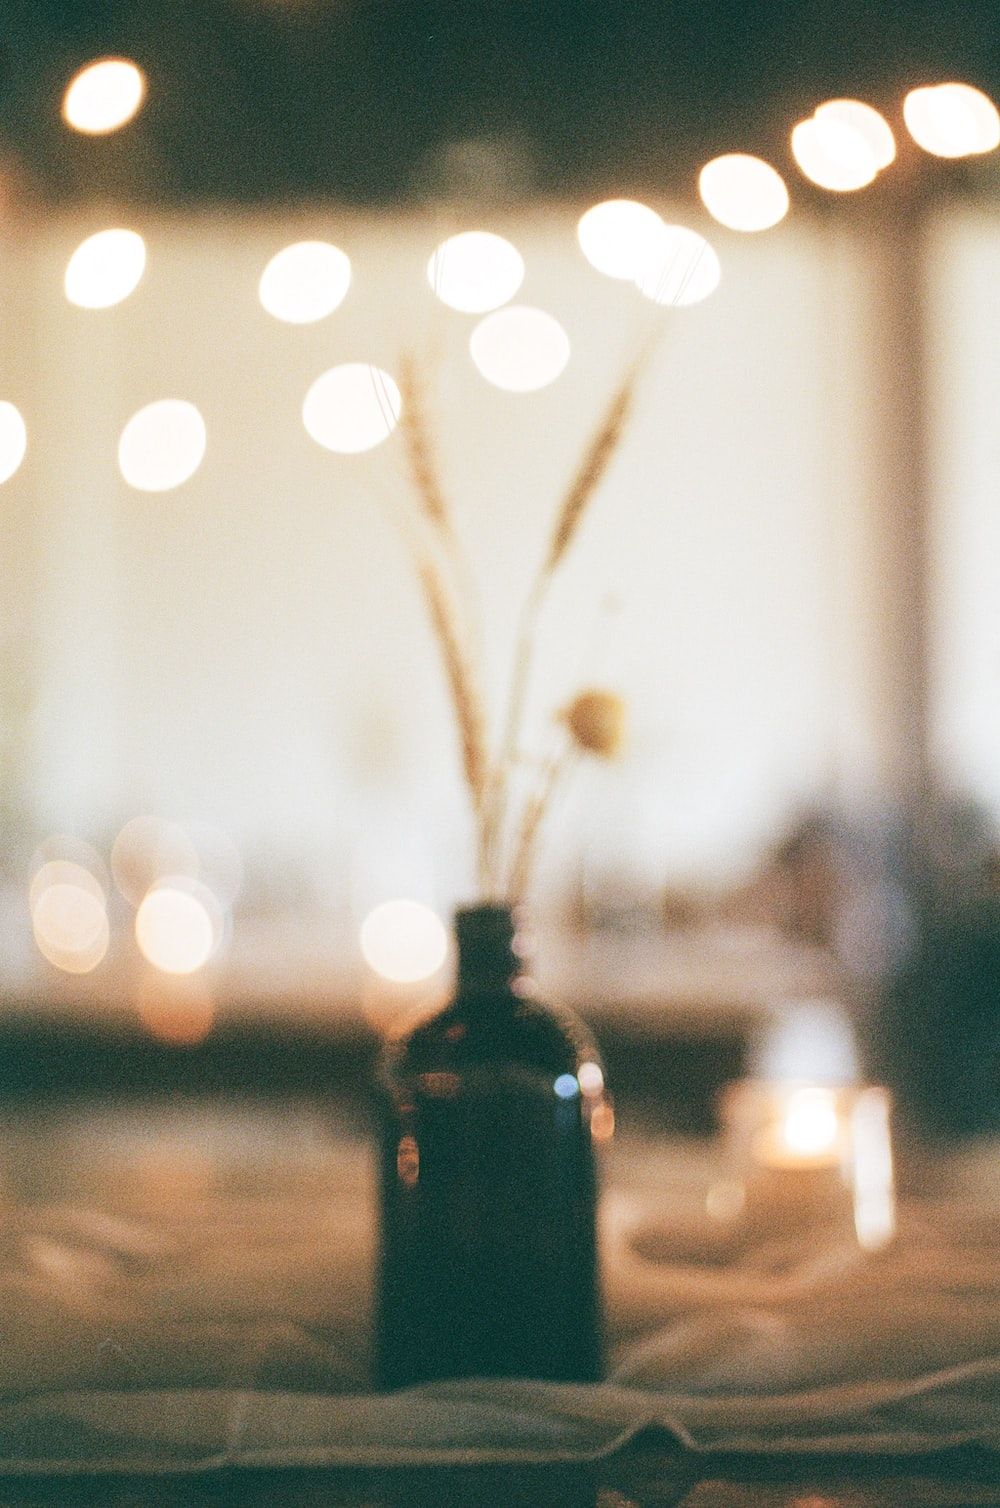 A vase with wheat in it sitting on a table. - Photography